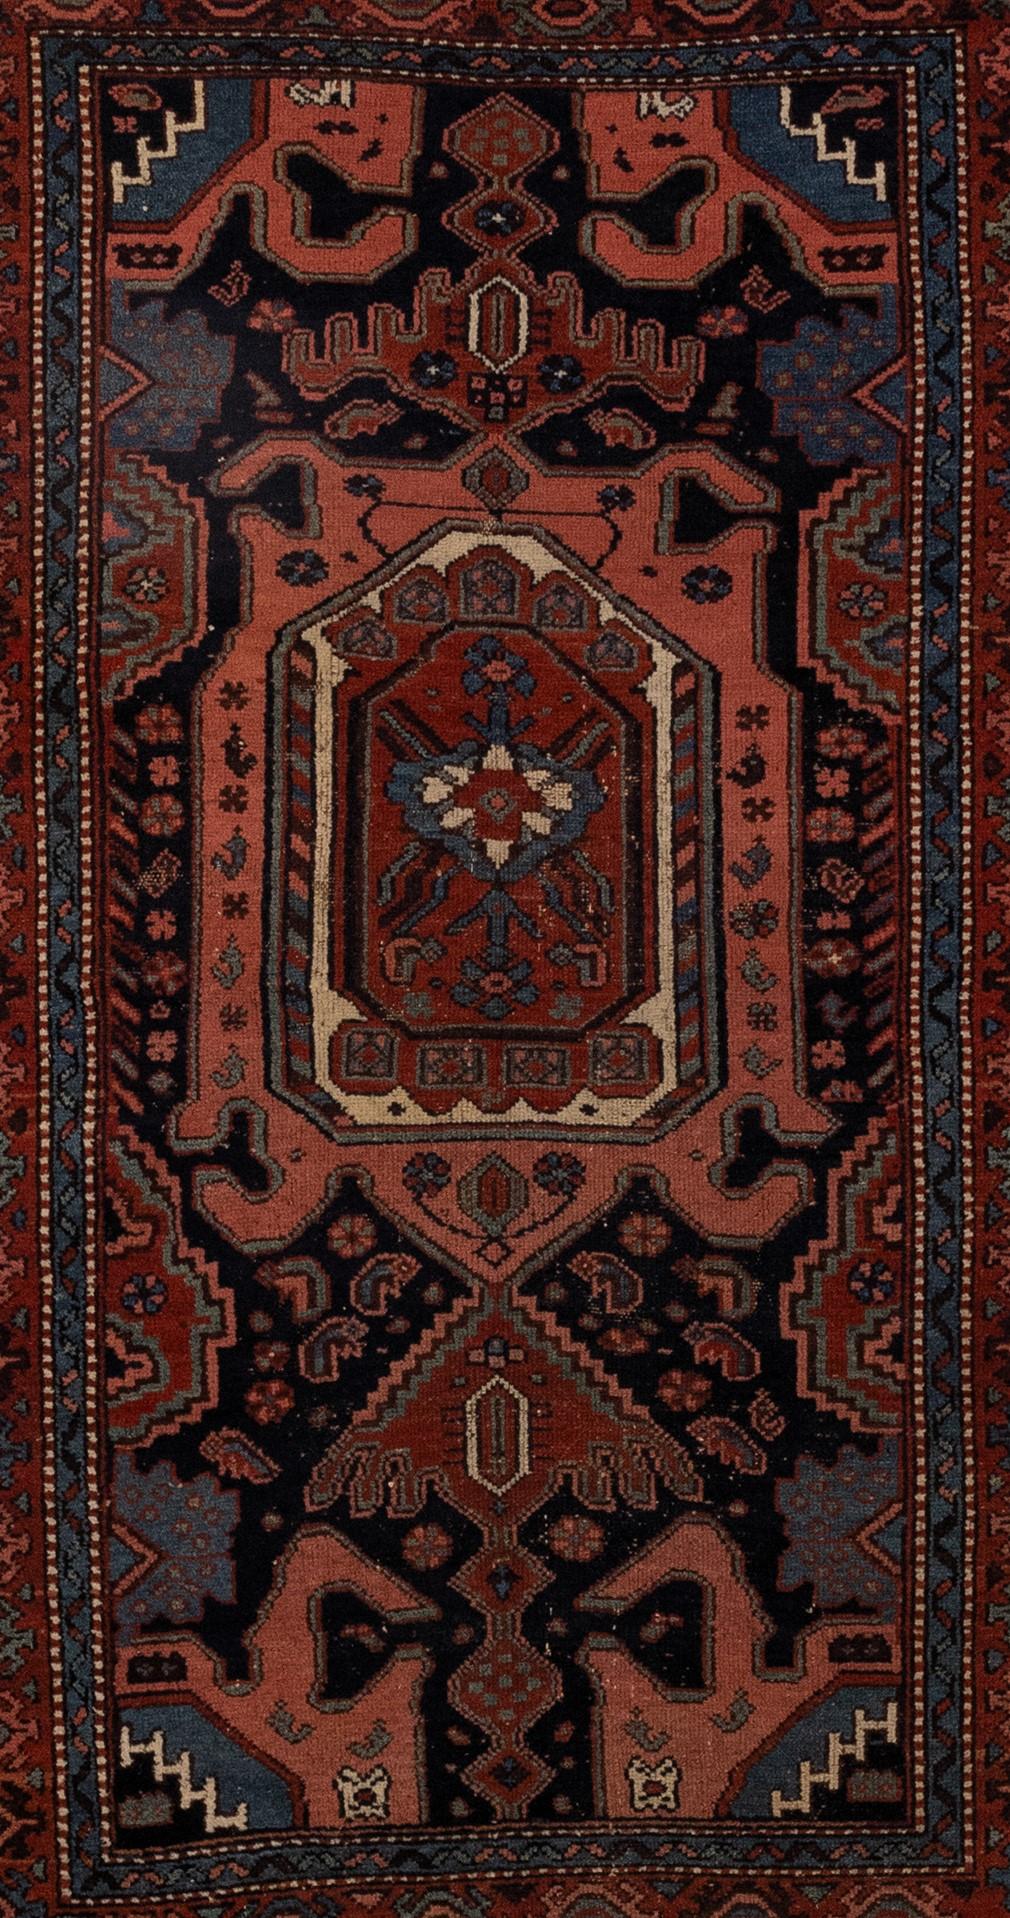 
This stunning antique rug from the Caucasus region is a true masterpiece that represents the area's rich cultural heritage and artistic traditions. Its intricate patterns and motifs are the result of skilled weavers who used traditional techniques